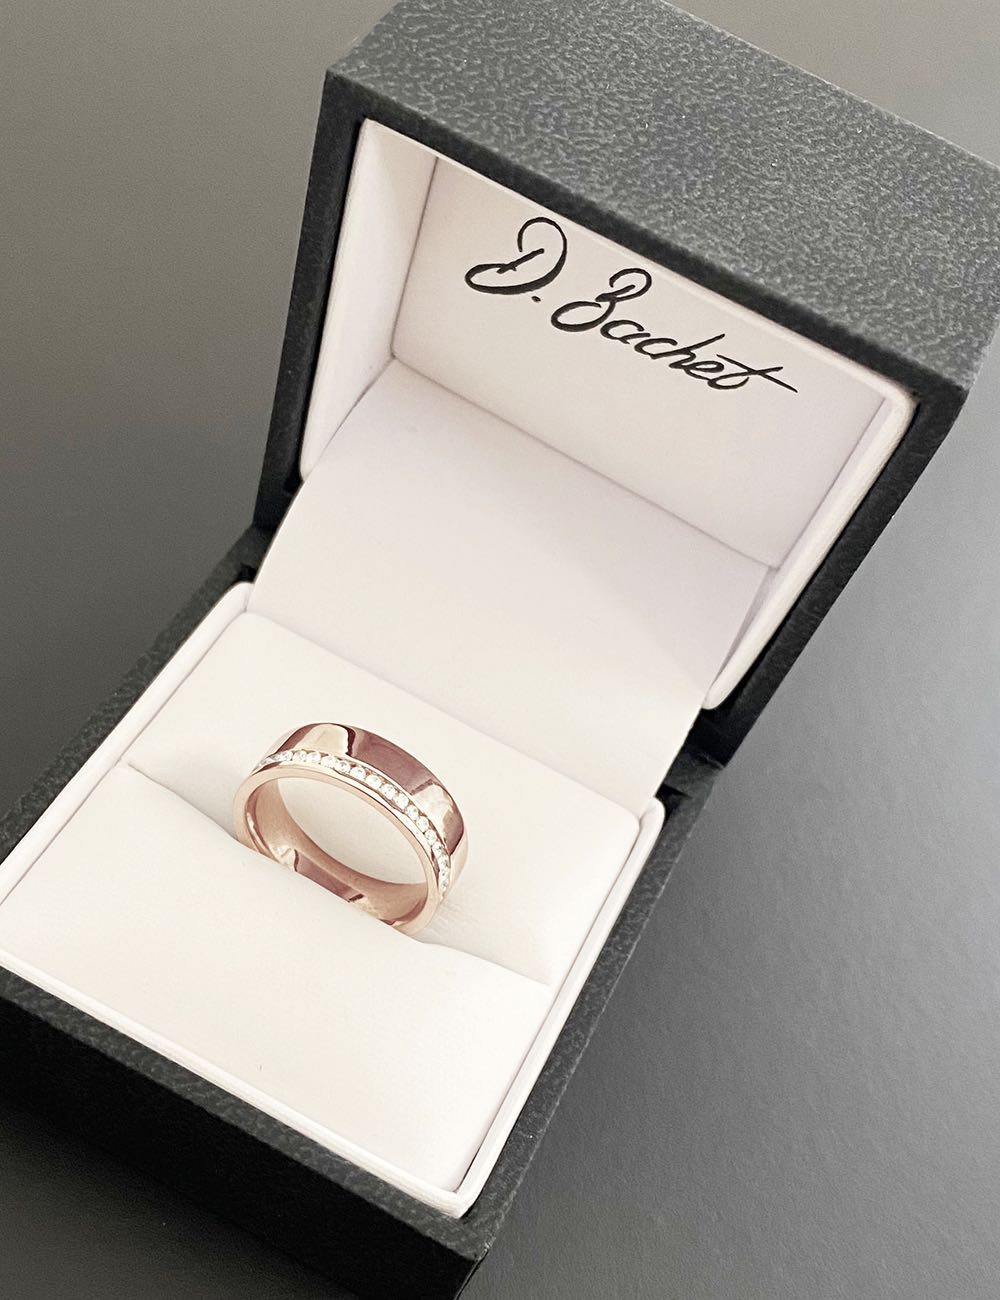 A flat and wide eternity wedding ring for women, in rose gold and white diamonds.